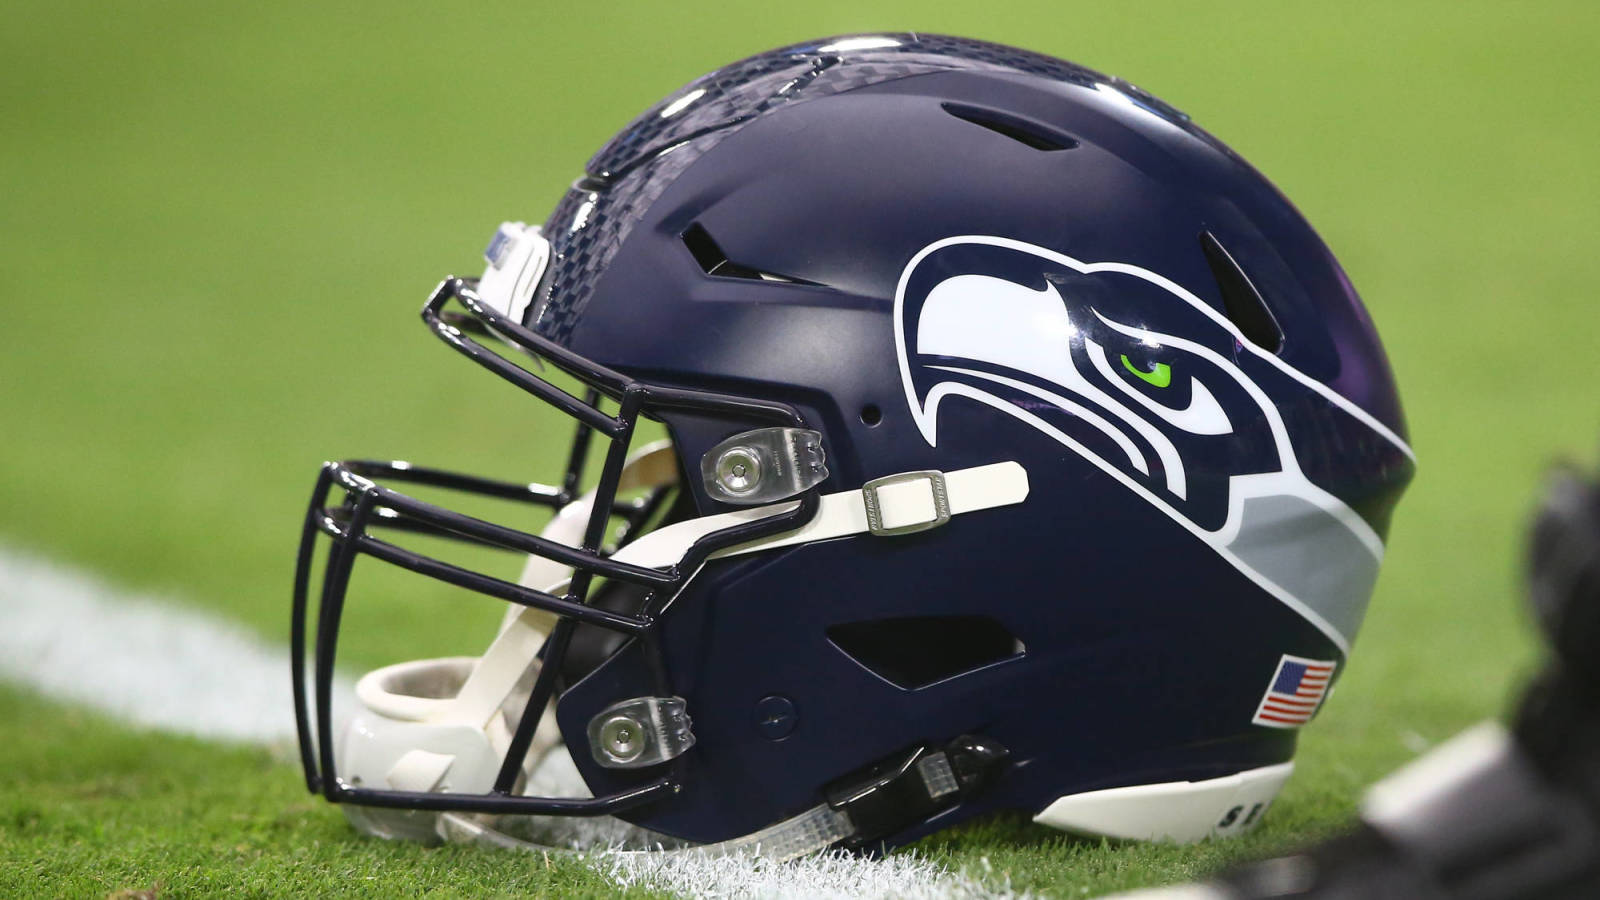 Seahawks’ Darrell Taylor carted off subject in scary scene